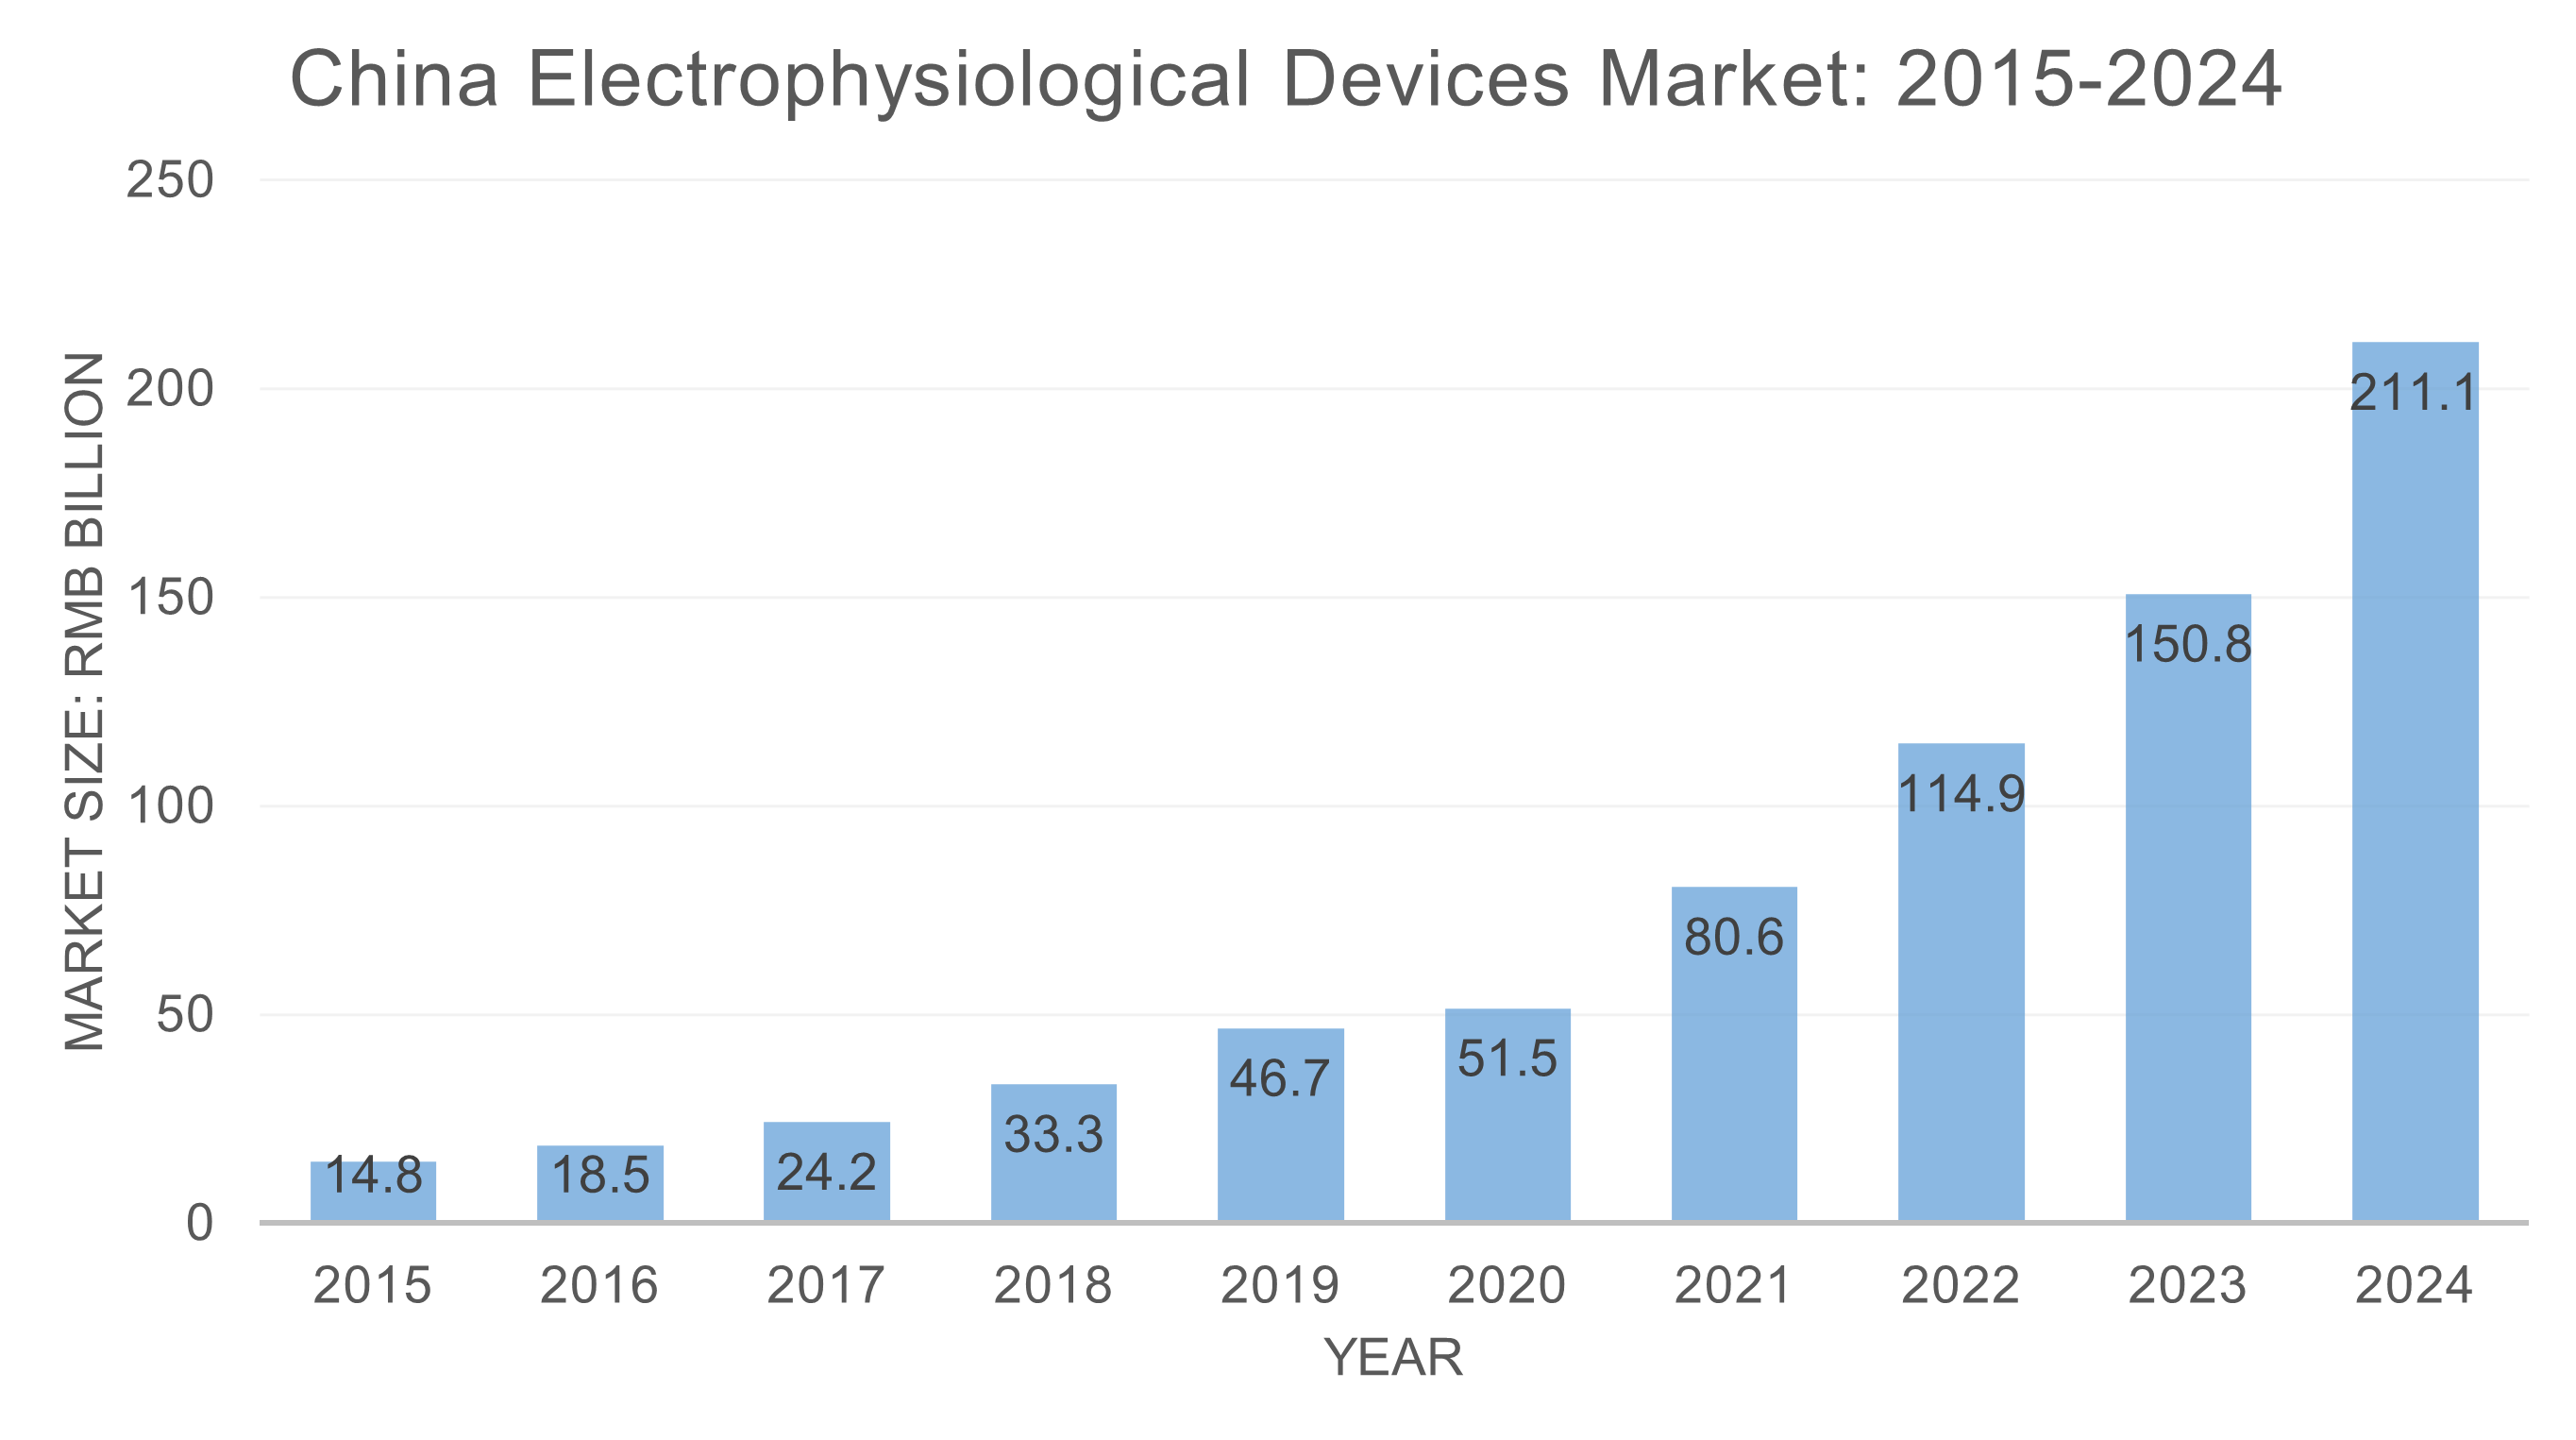 China Electrophysiological Devices Market: 2015-2024